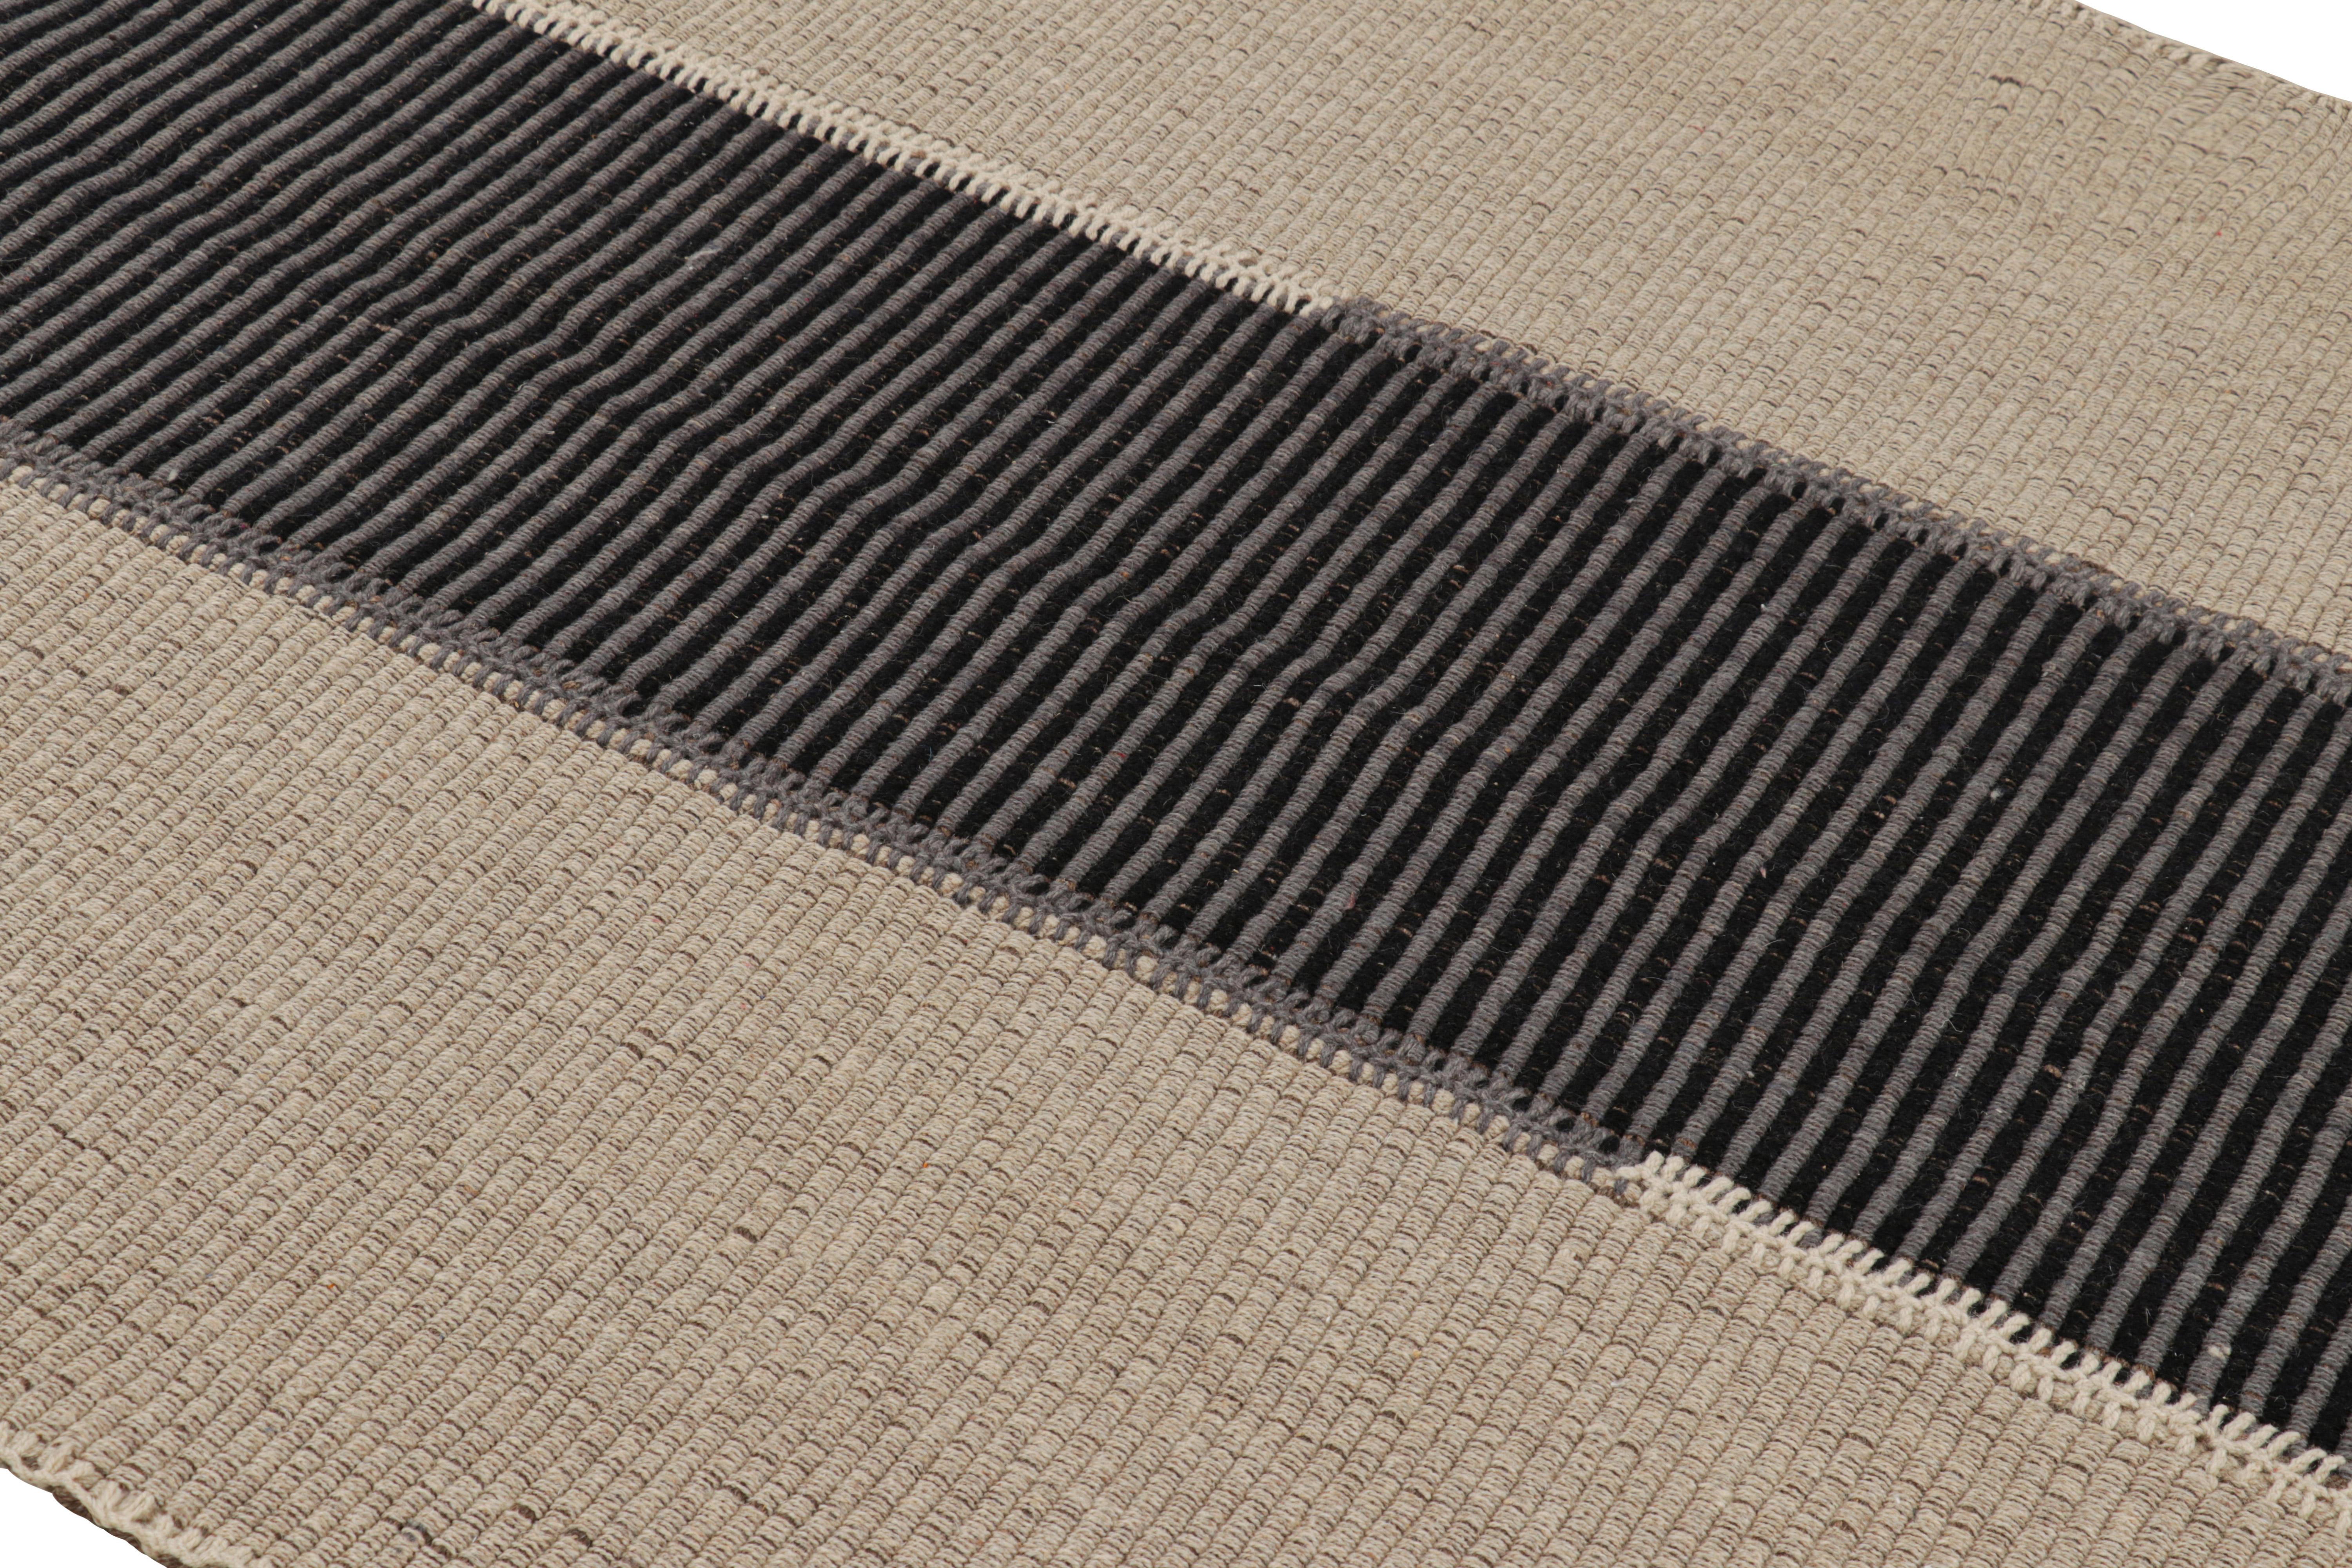 Handwoven in wool, a 5x6 Kilim design from an inventive new contemporary flat weave collection by Rug & Kilim.

On the Design: 

Fondly dubbed, “Rez Kilims”, this modern take on classic panel-weaving enjoys a fabulous, unique play of beige and black